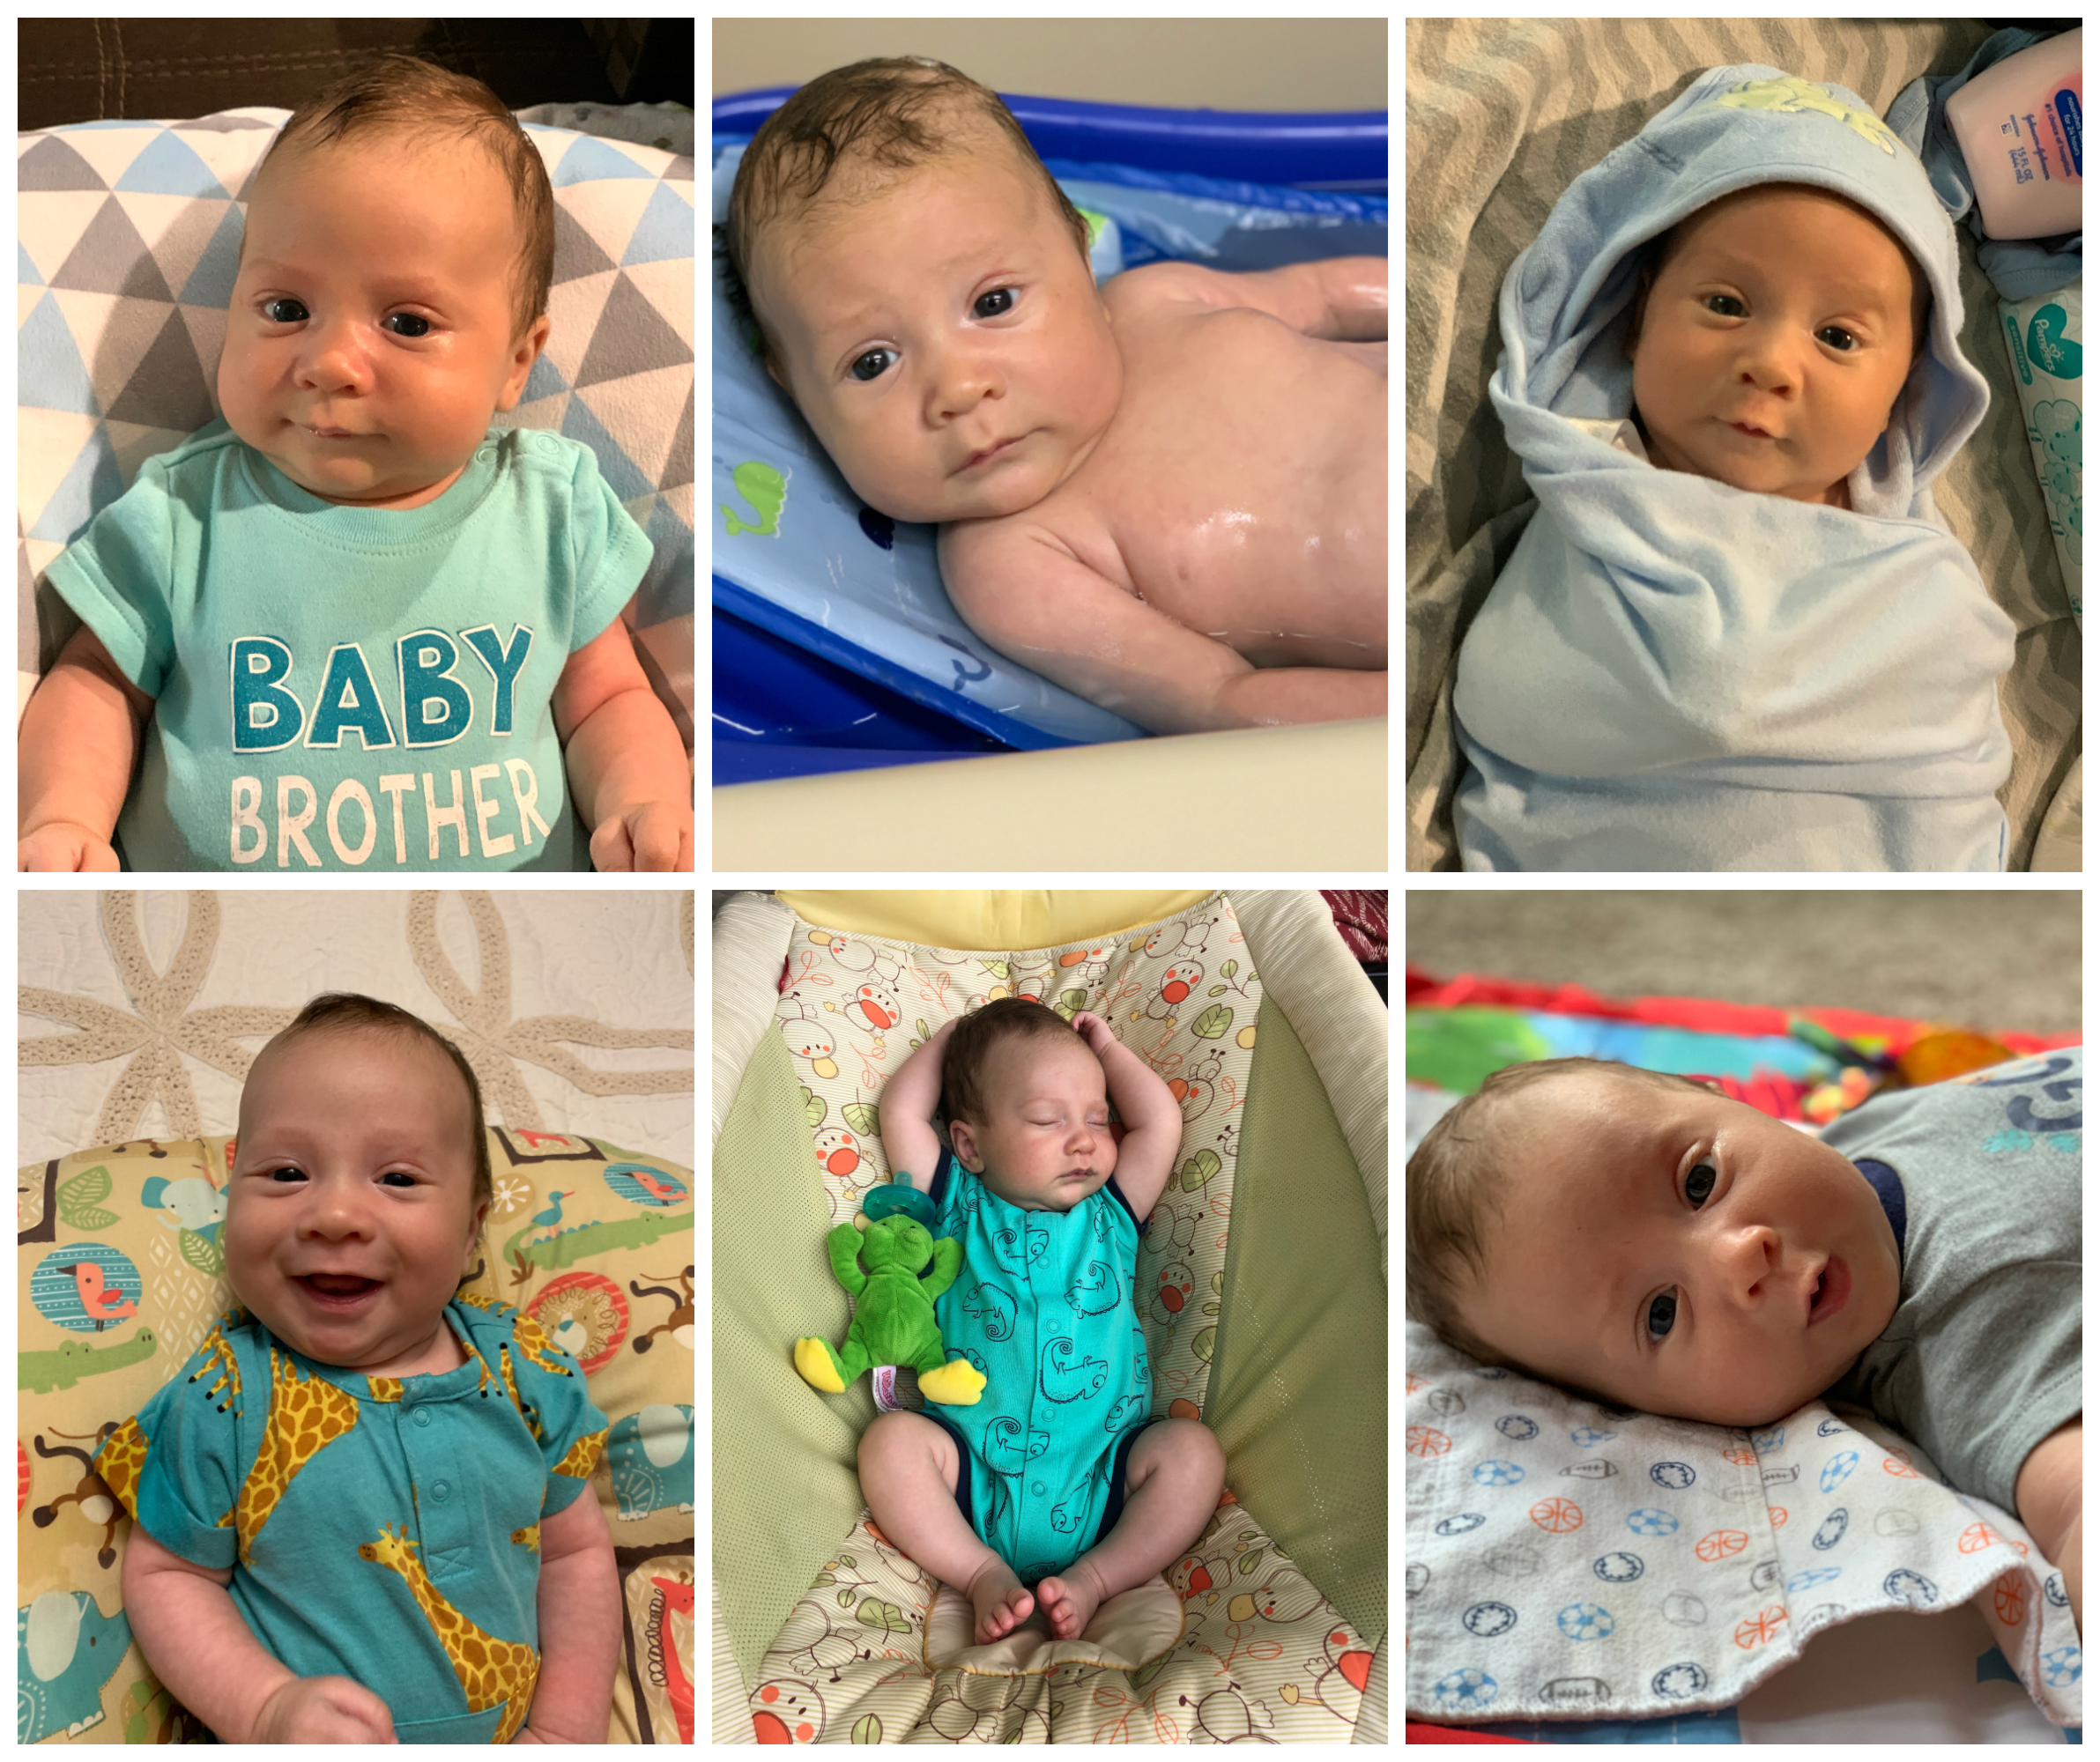 Brody-2months-faces